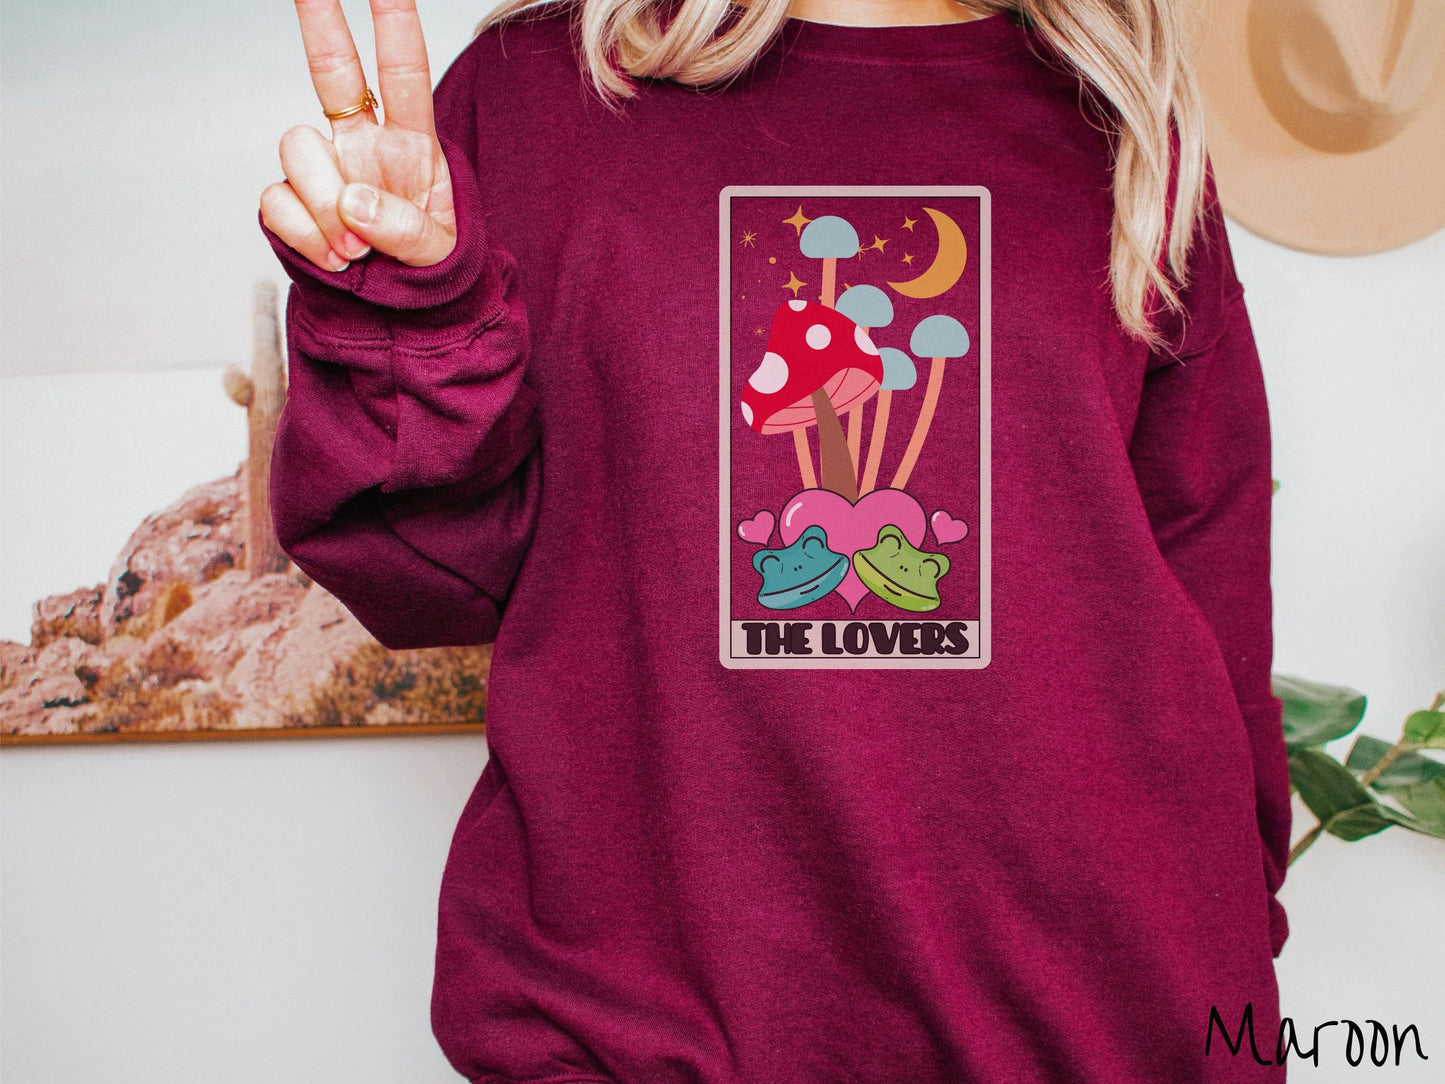 A woman wearing a cute maroon colored sweatshirt with a large red mushroom and 4 turquoise mushrooms in the background, all under a crescent yellow moon and yellow stars, two green frogs smiling in front of pink hearts below the mushrooms.